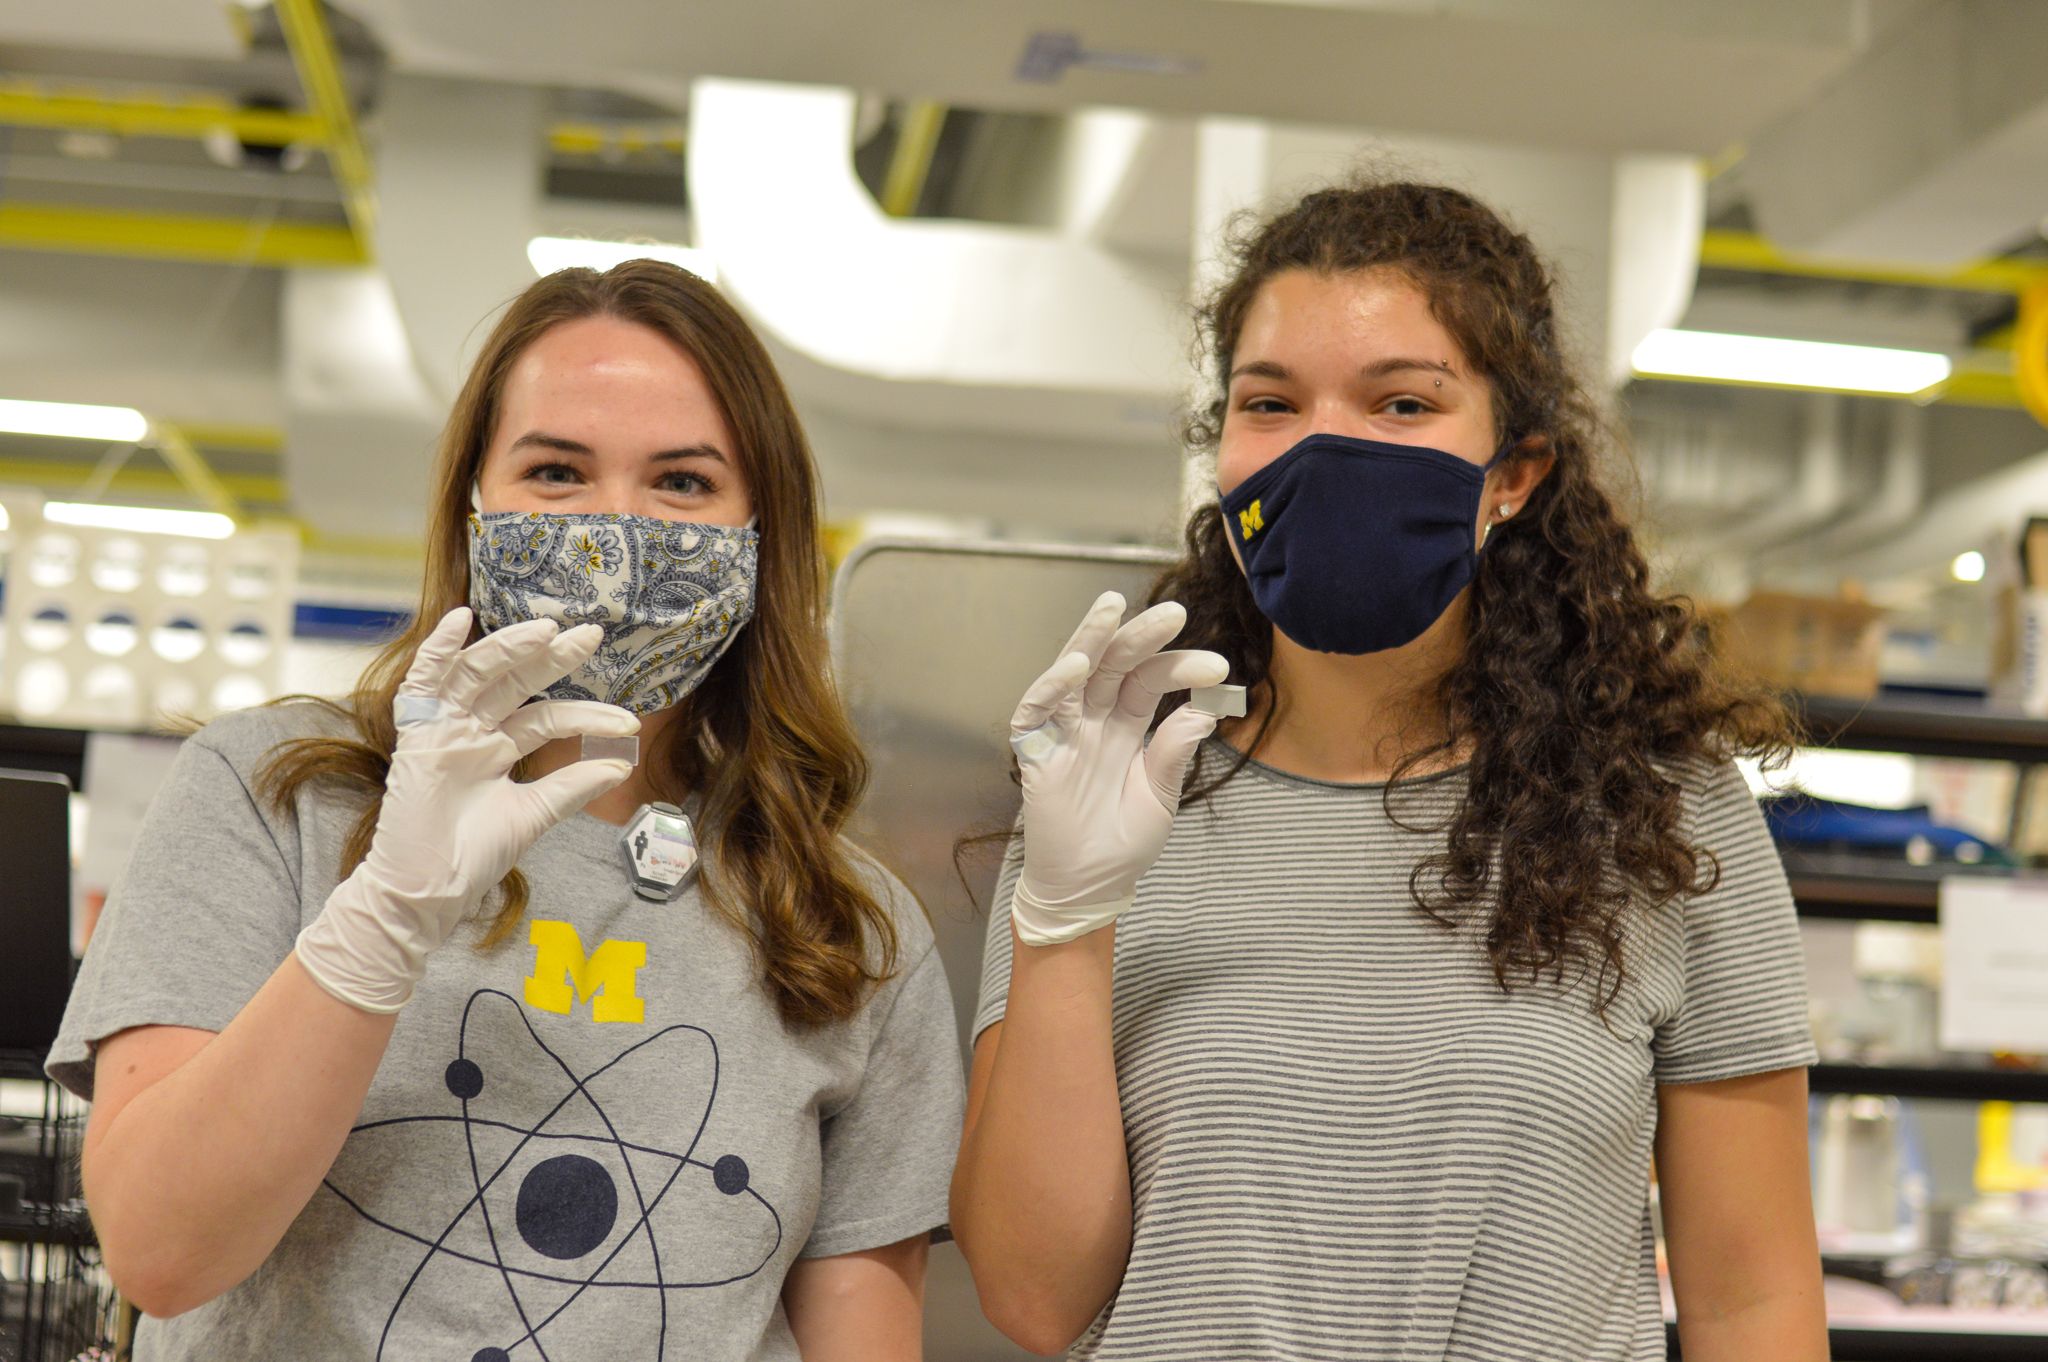 PhD student, Leah, and undergraduate student, Tessa, working together to characterize new organic scintillators made of organic glass.